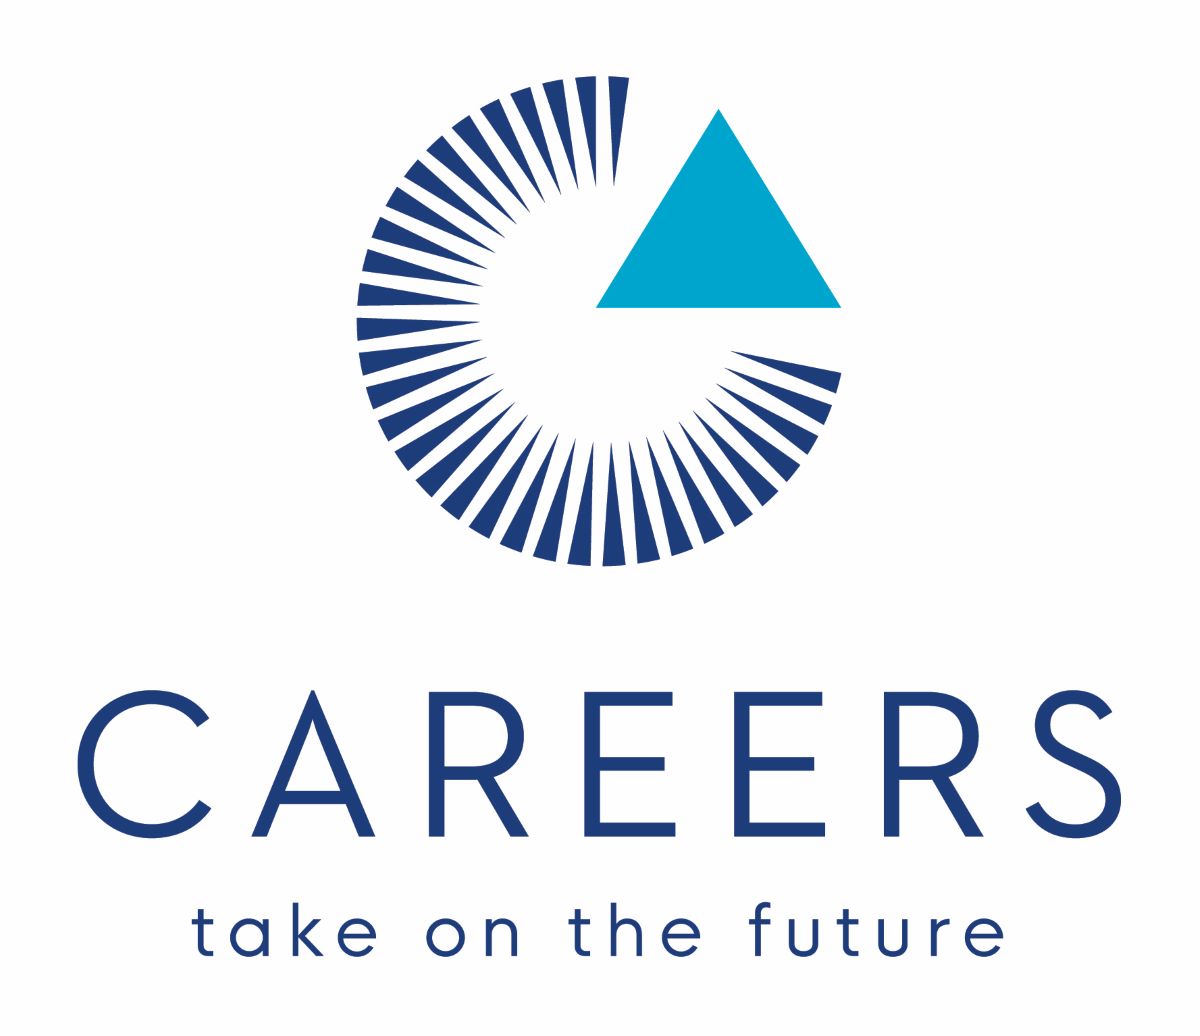 Careers: The Next Generation